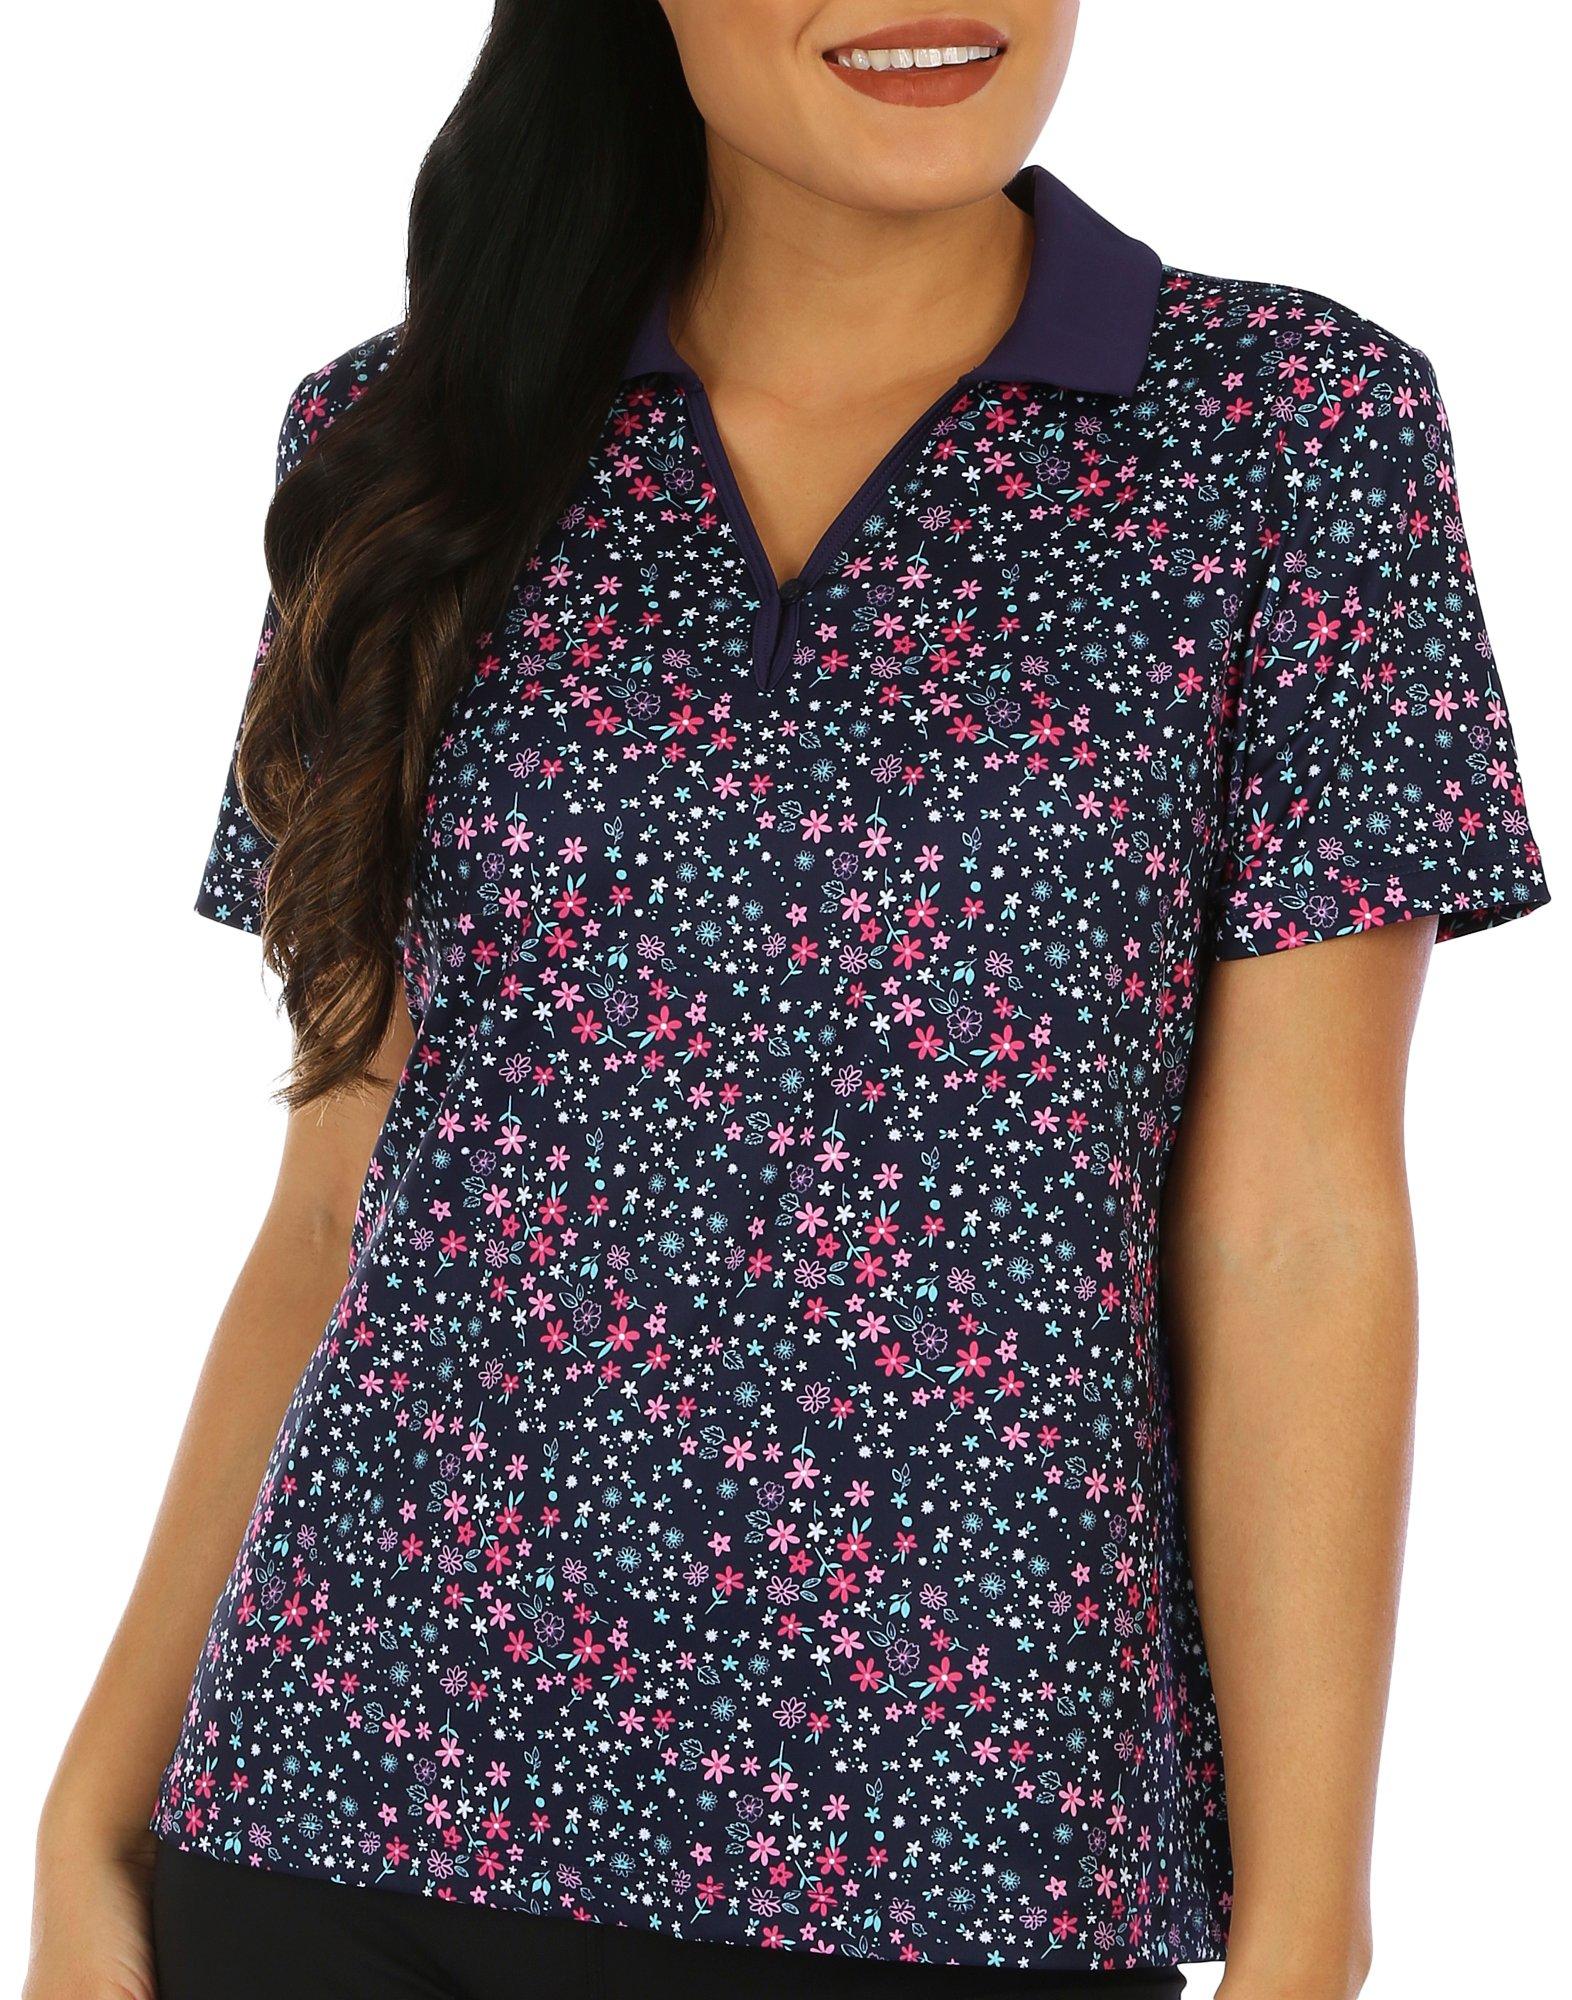 Petite Floral Mesh Inset Short Sleeve Polo